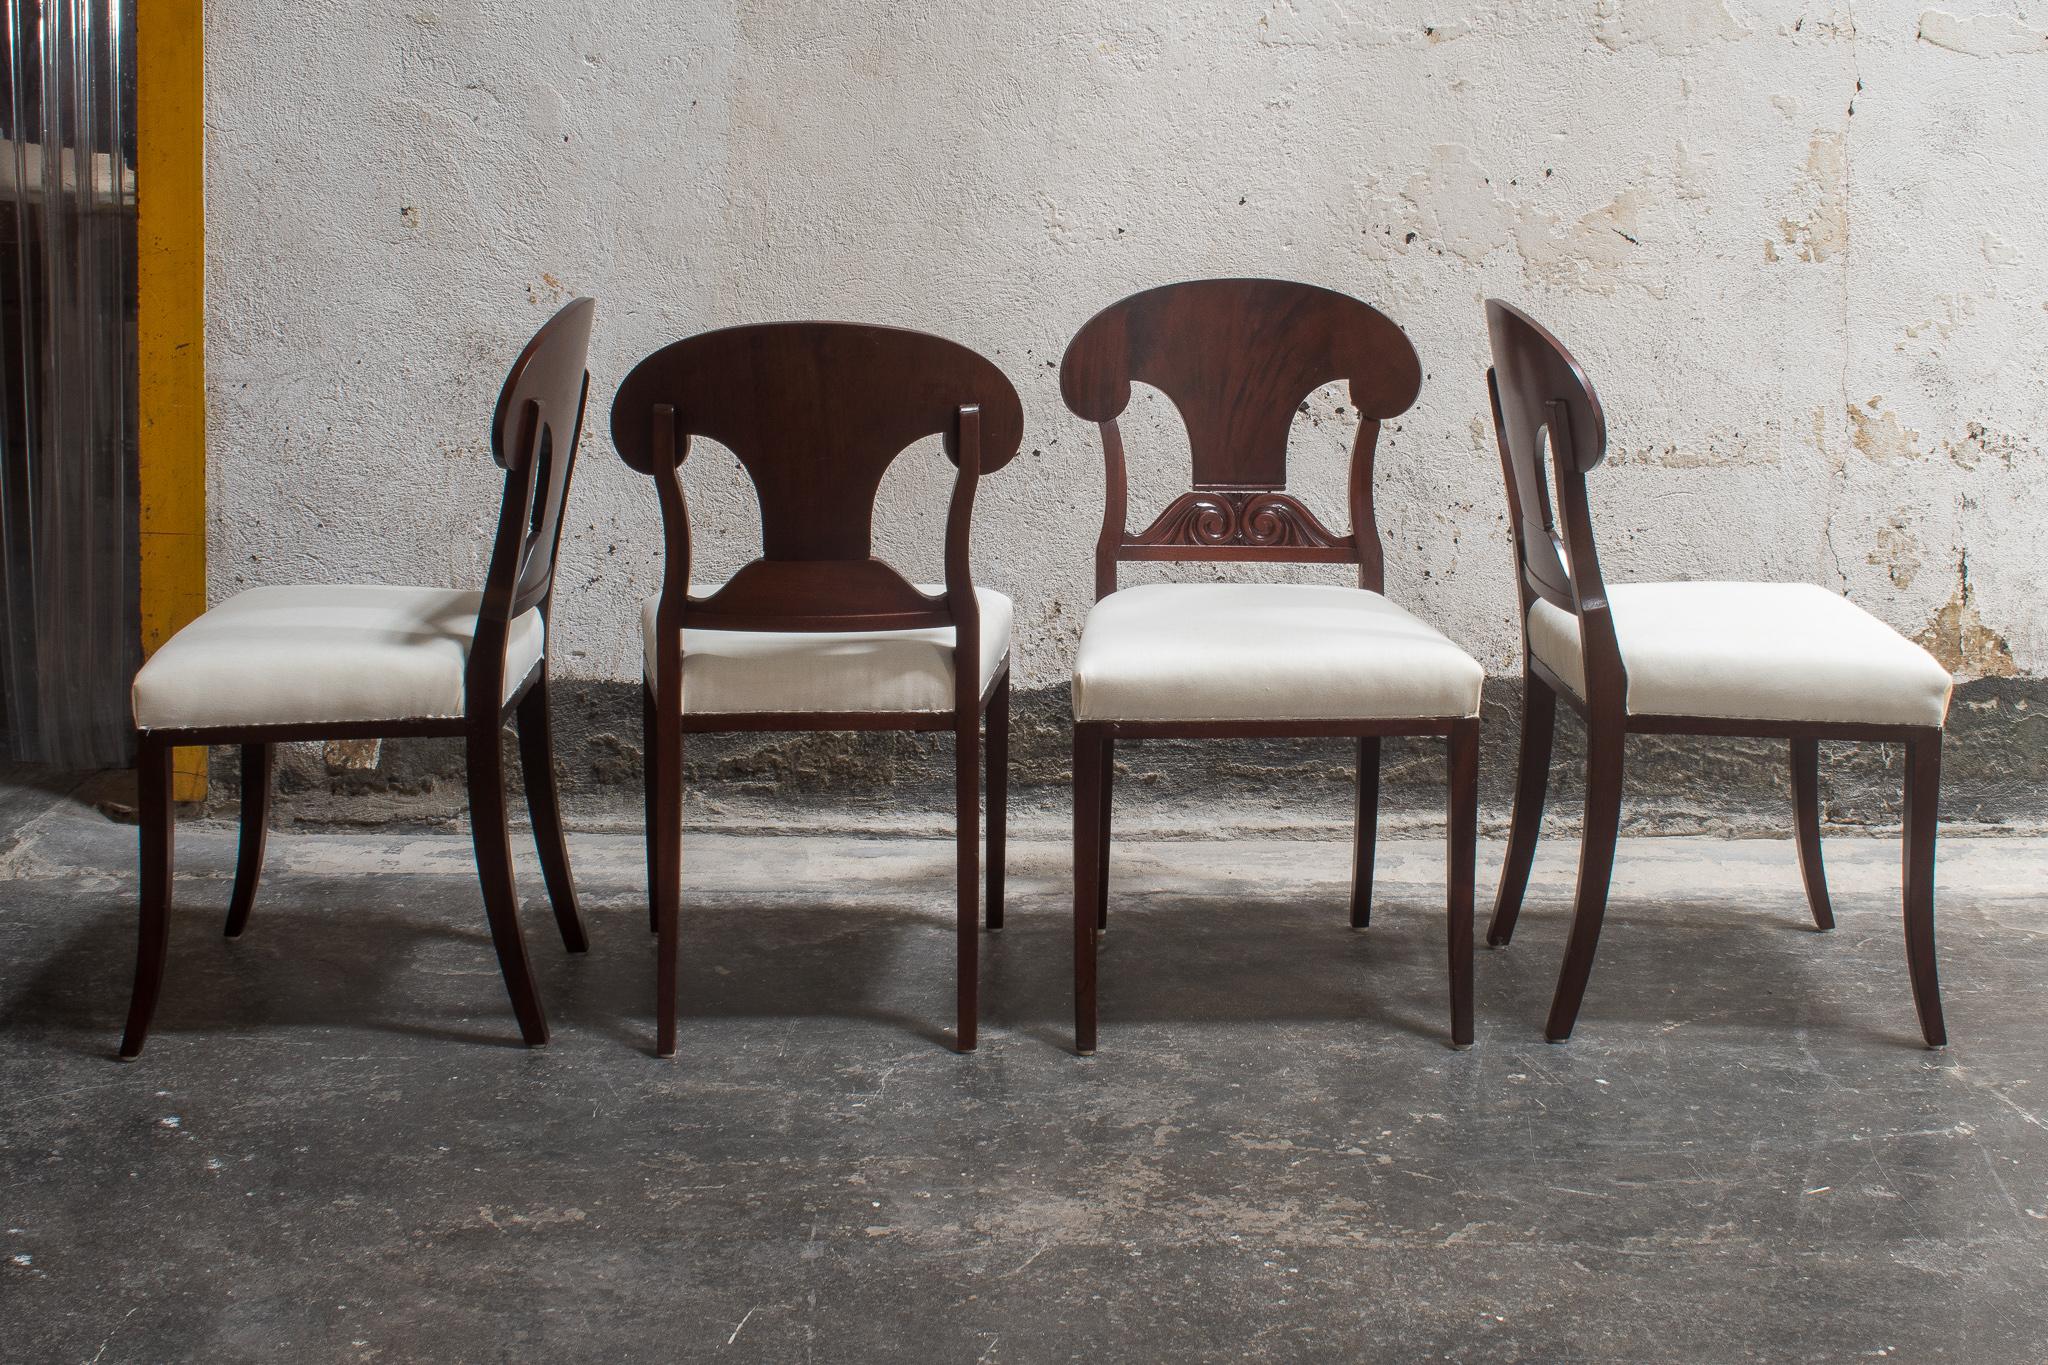 Swedish Karl Johan (Biedermeier) Revival Napoleon Hat Dining Chairs. Shovel-shaped backrest with decorative scroll carved center bar. These mahogany dining chairs come in a rare set of 8, unusual for the period and perfect for today's dining rooms.